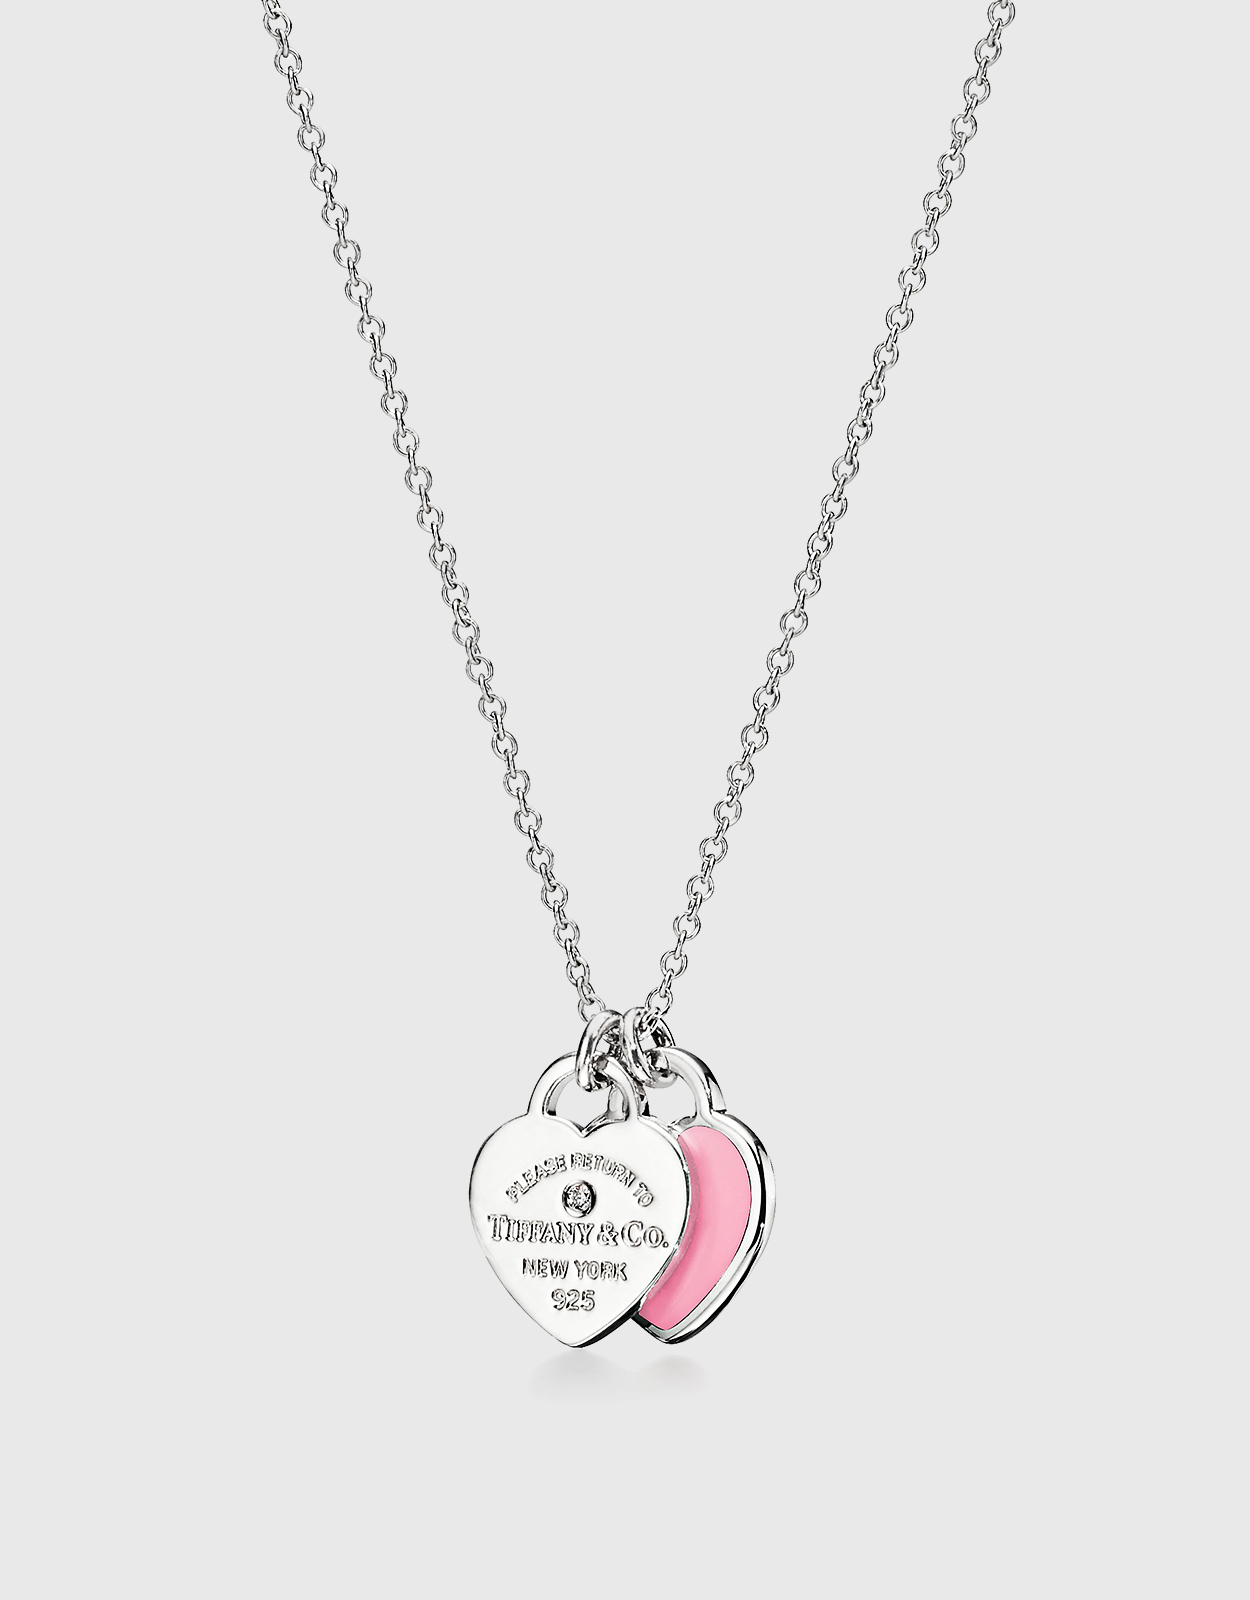 Tiffany & Co Diamond and Pink Sapphire Heart Necklace | Farringdons  Jewellery